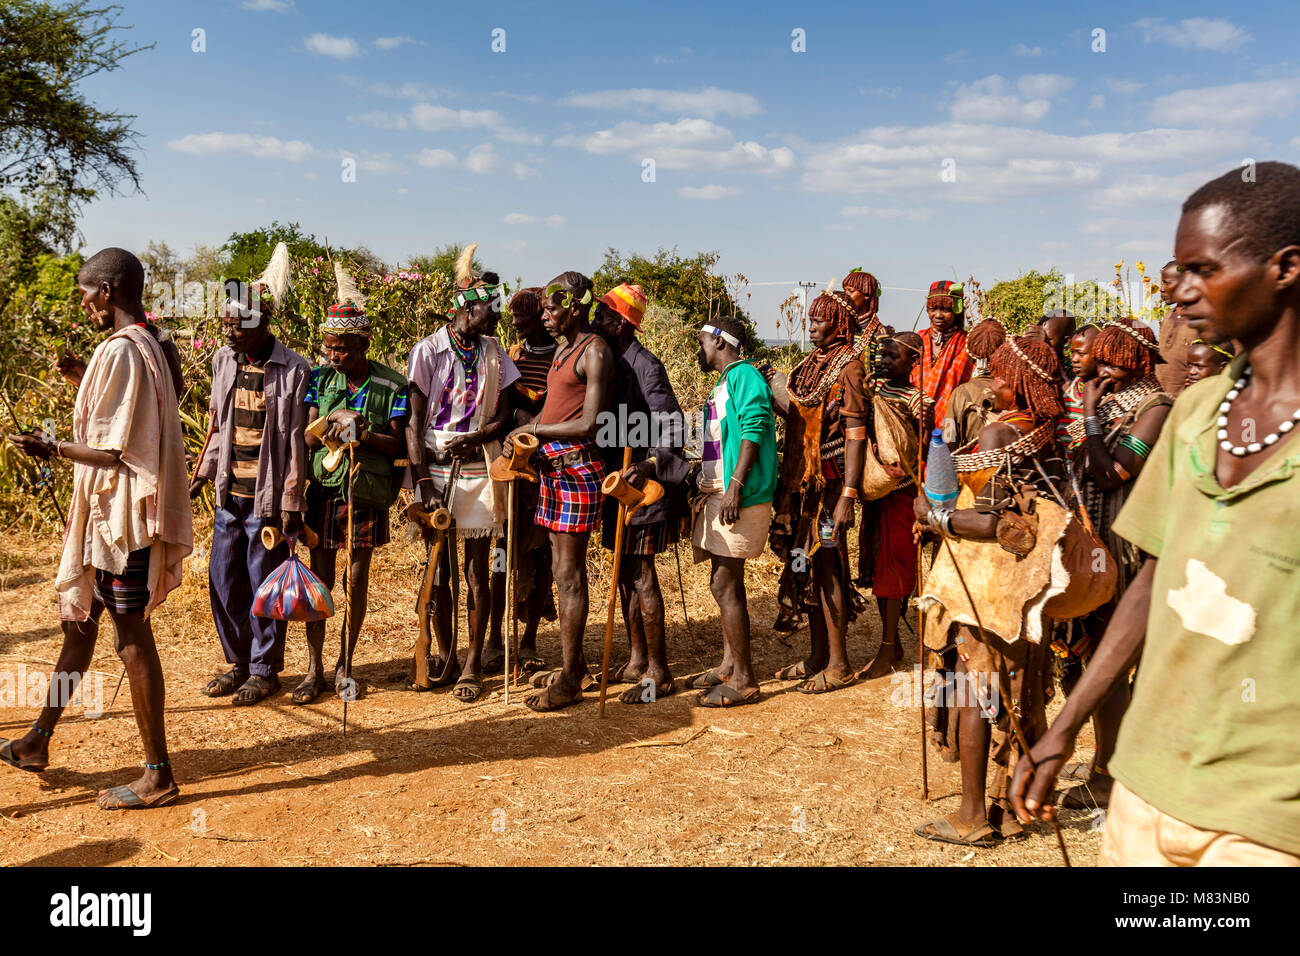 Hamar People Arriving At A Bull Jumping Ceremony, Dimeka, Omo Valley, Ethiopia Stock Photo